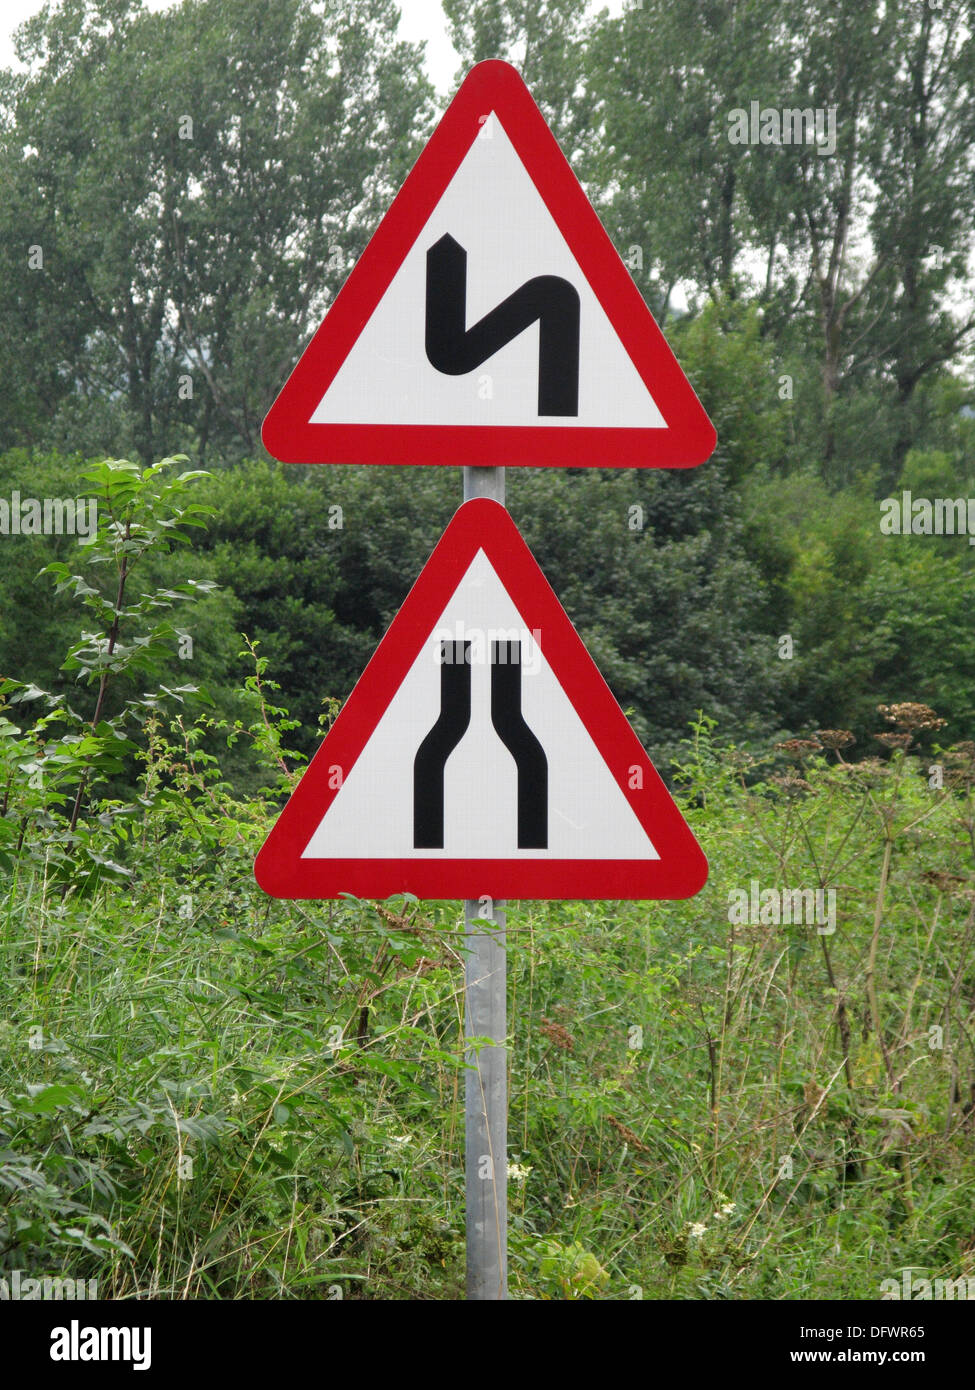 Red Triangle Caution and Warning Road Signs for a Narrowing Road and Bendy Road, UK Stock Photo